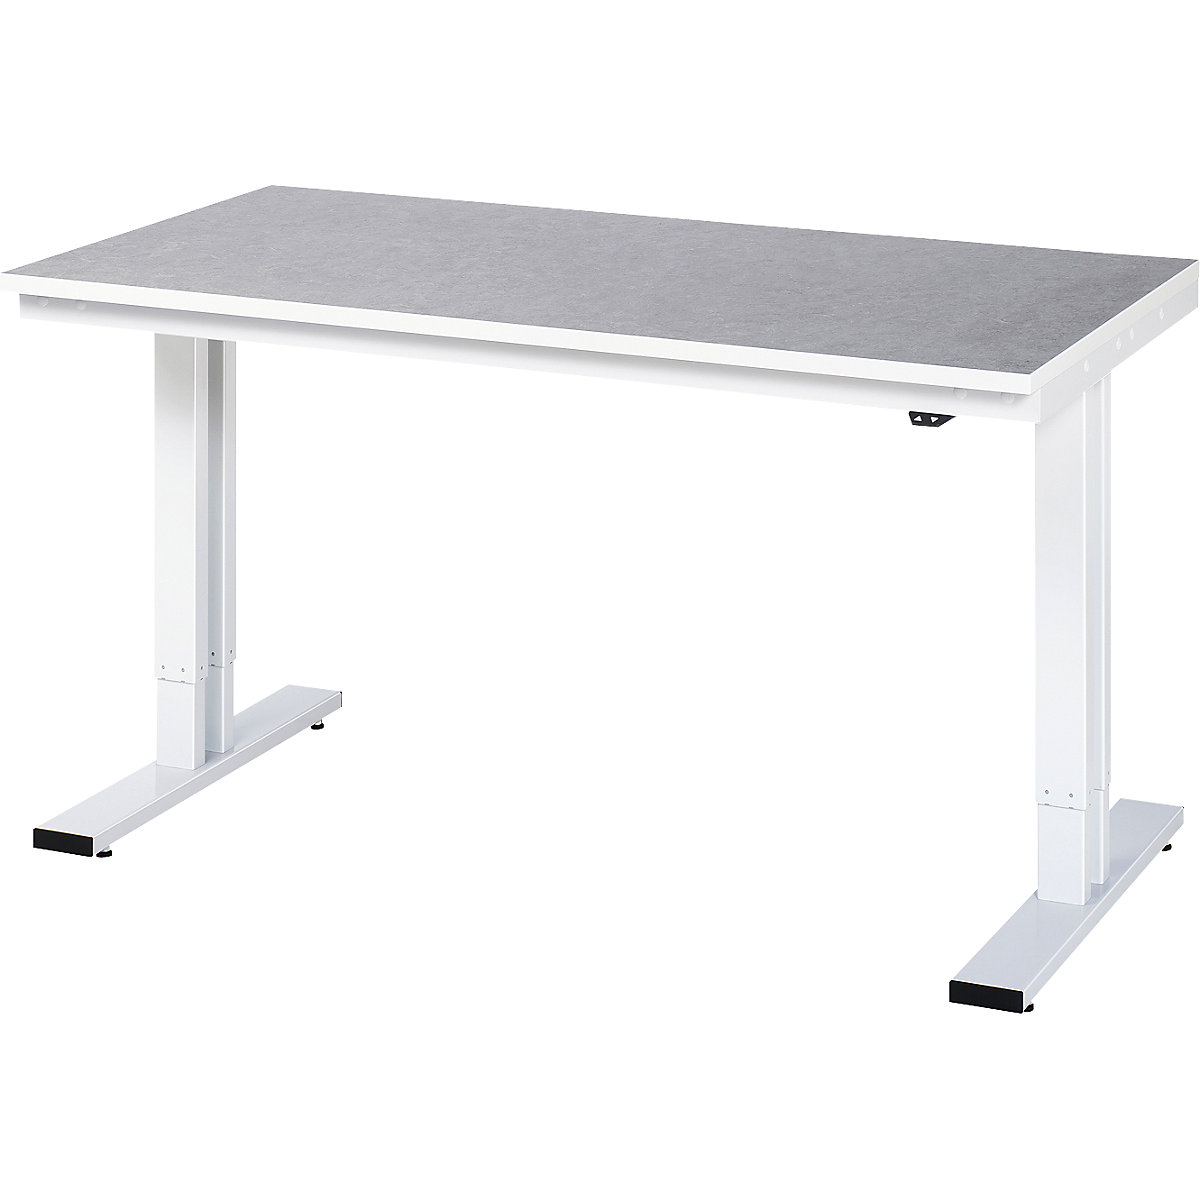 Work table, electric height adjustment – RAU, linoleum cover, max. load 300 kg, WxD 1500 x 800 mm-10